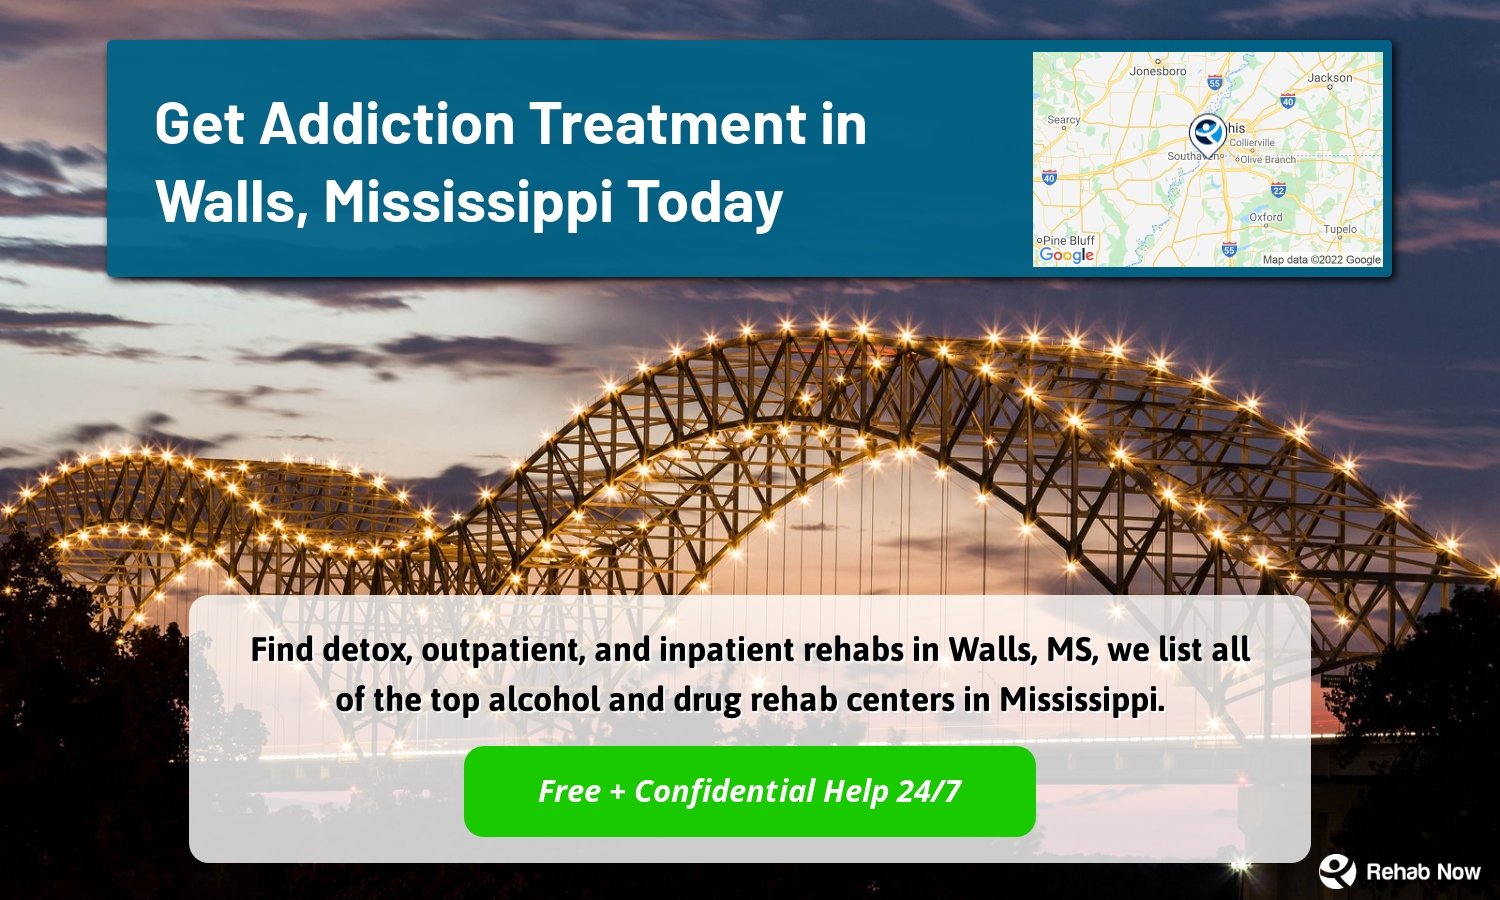 Find detox, outpatient, and inpatient rehabs in Walls, MS, we list all of the top alcohol and drug rehab centers in Mississippi.